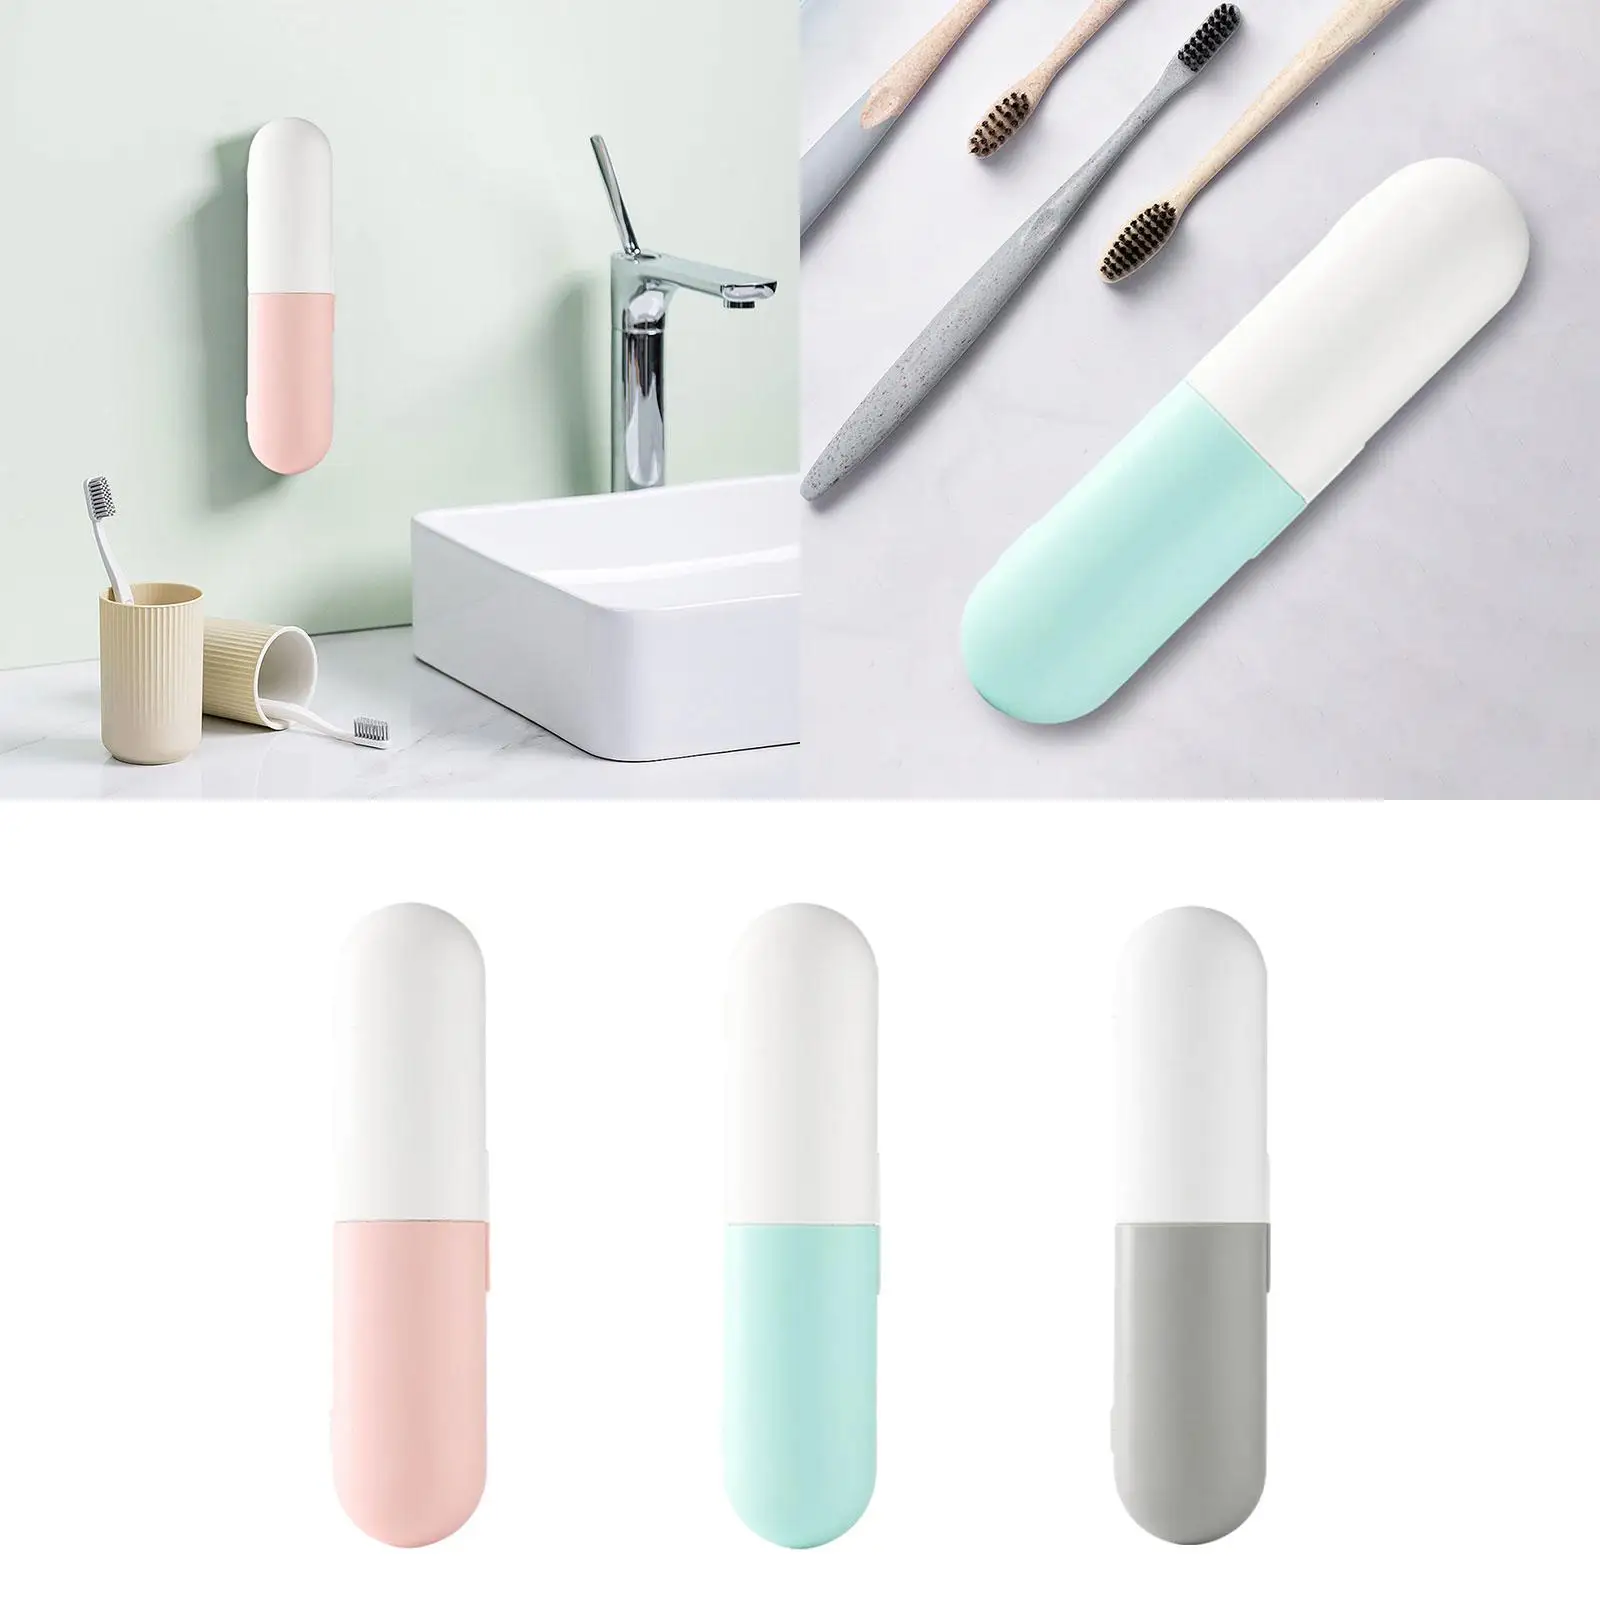 Portable Toothbrush Sanitizer Smart Toothbrush Cover Tooth Brush Travel Case Toothbrush Cleaner Holder for Bathroom Travel Home